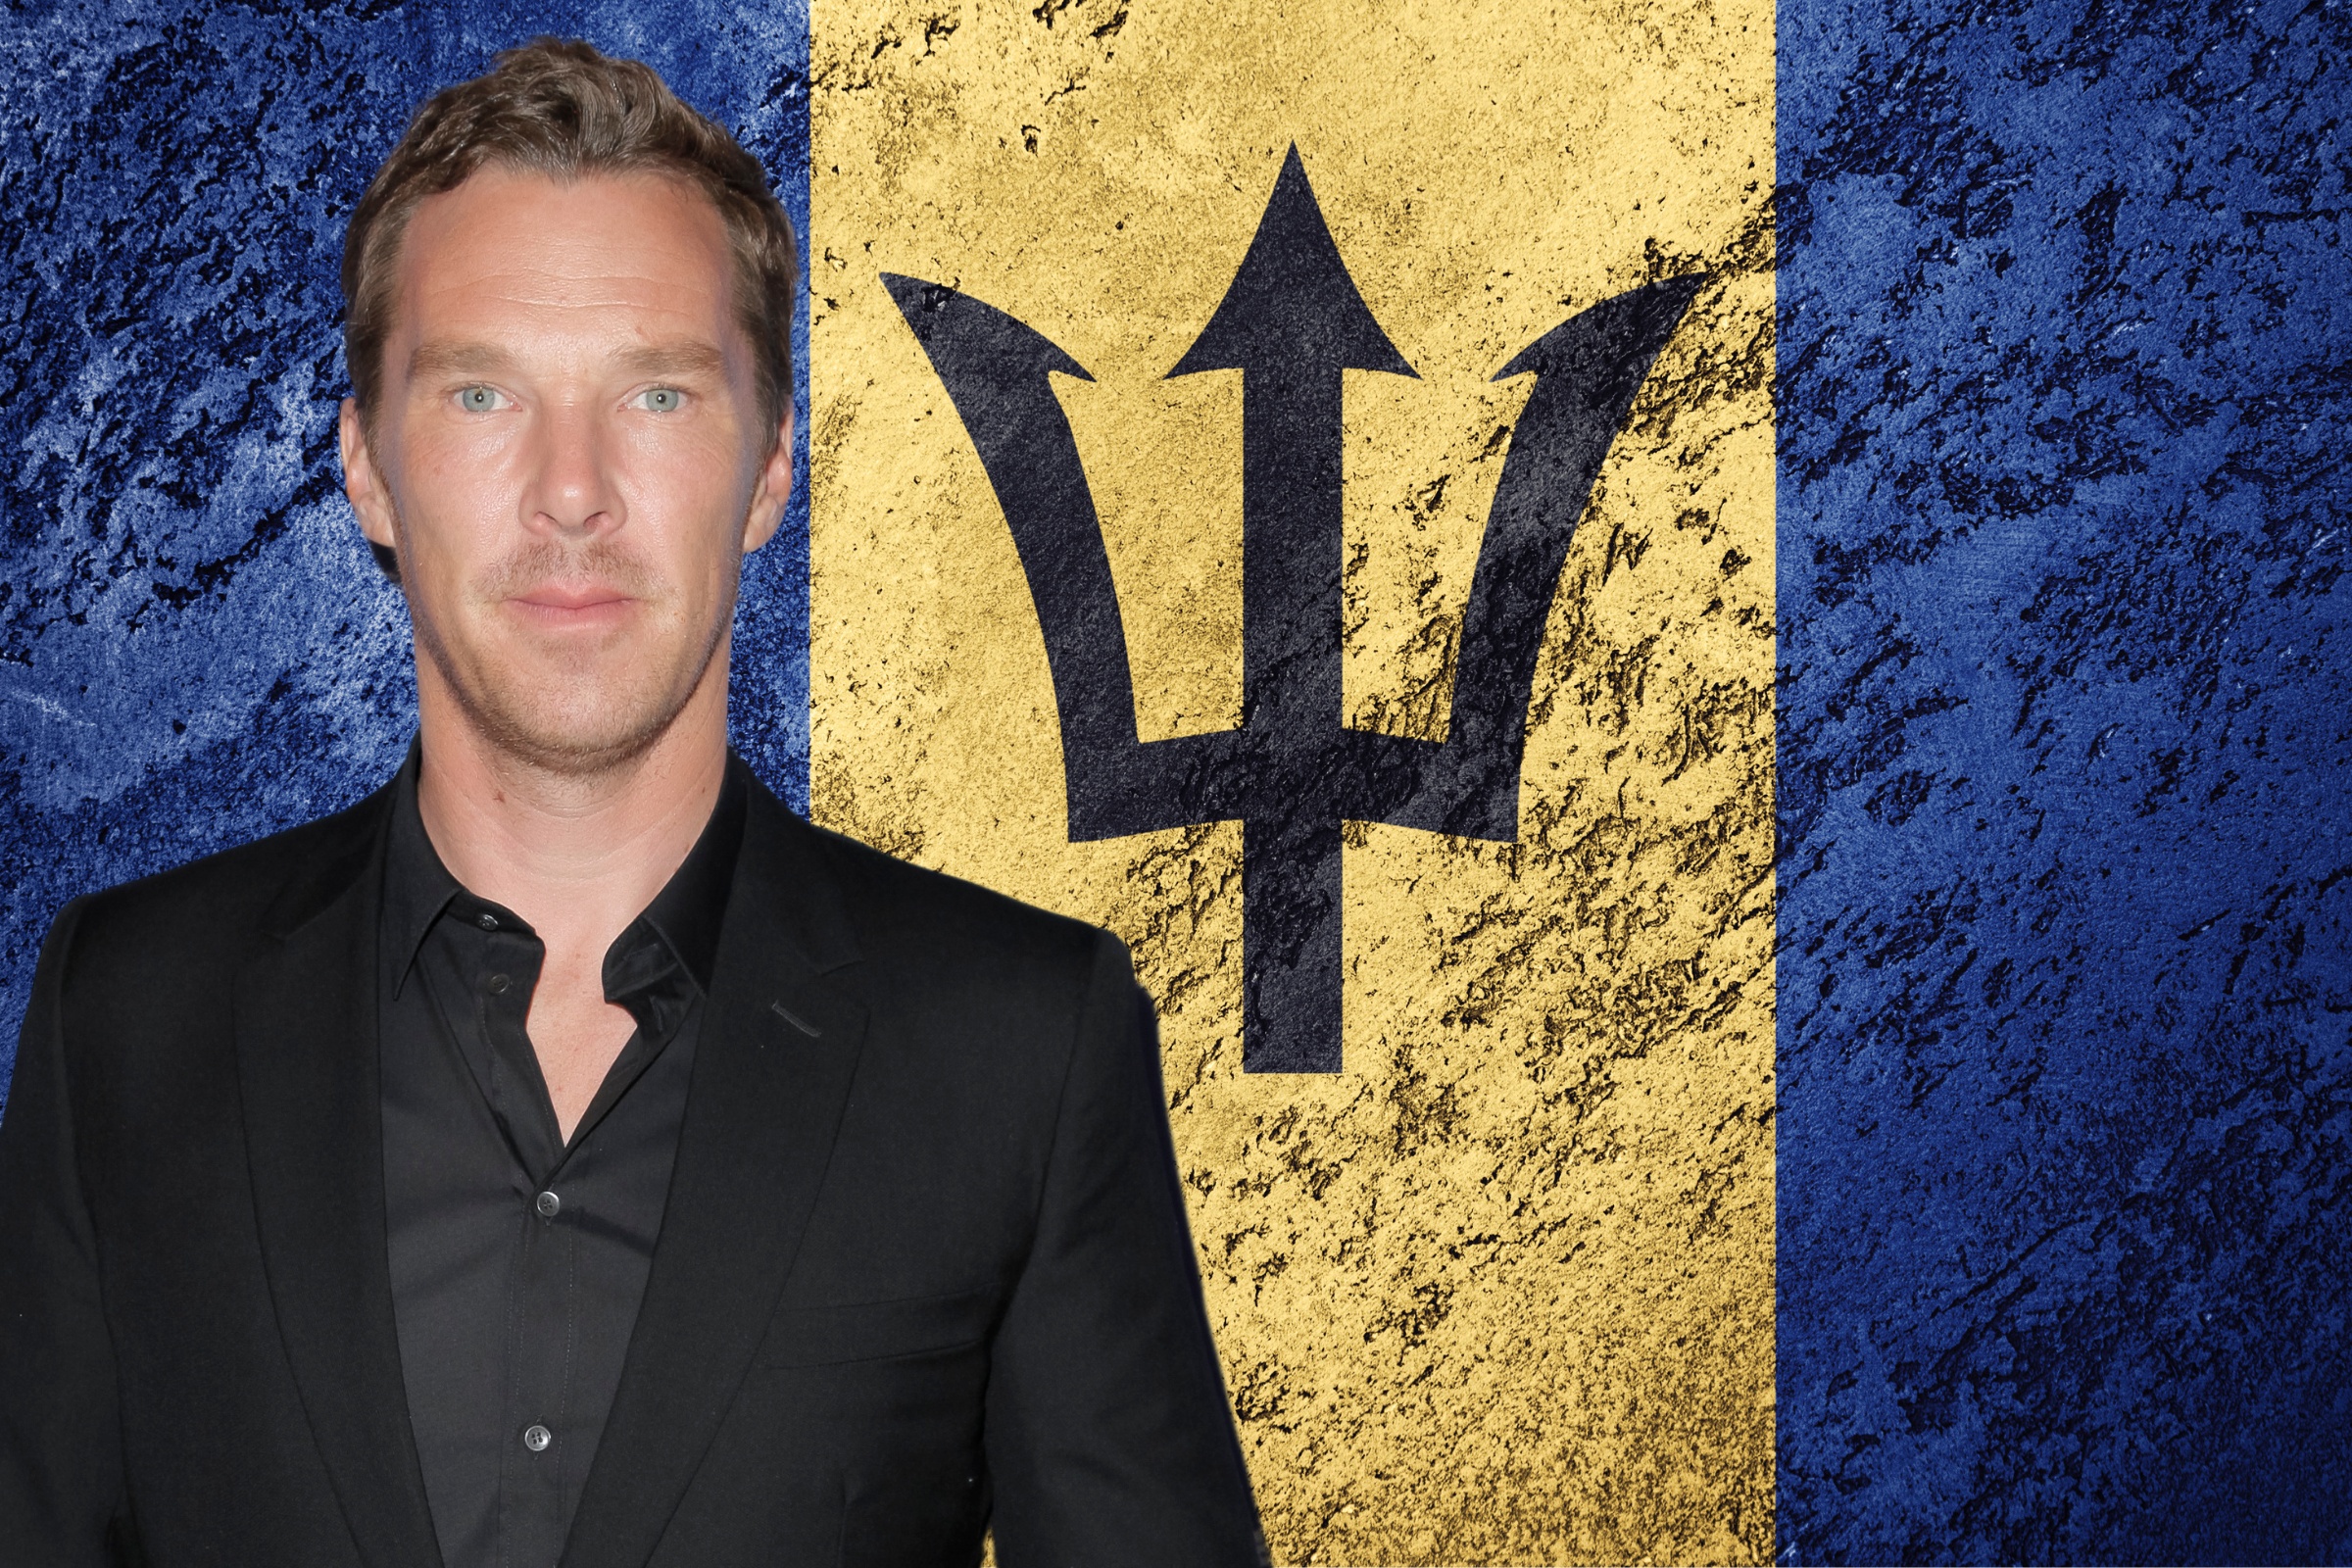 Barbados reparations chair sets the record straight on Benedict Cumberbatch